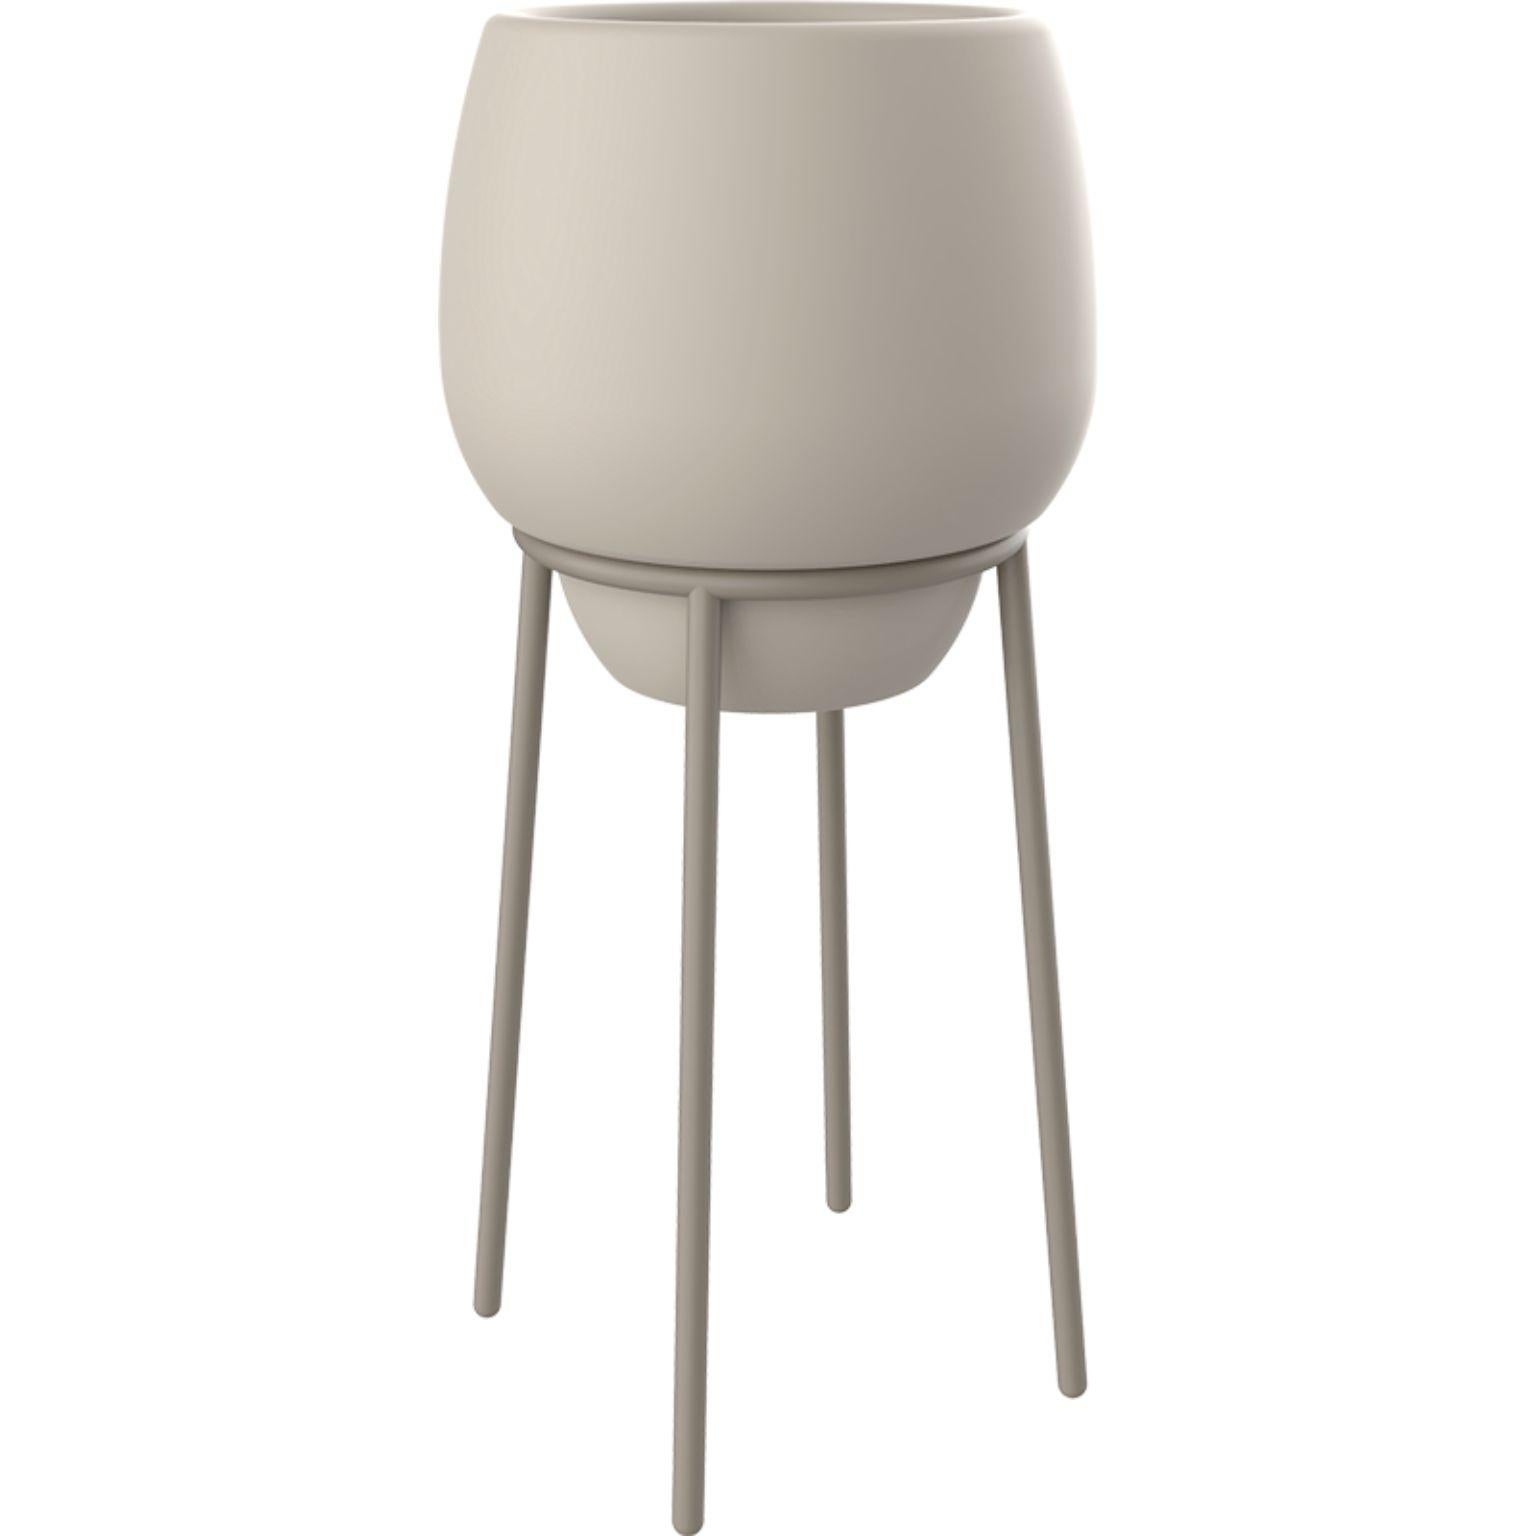 Lace cream high 50 pot by Mowee.
Dimensions: Ø55 x H112 cm.
Material: Polyethylene and stainless steel.
Weight: 9 kg.
Also available in different colors and finishes (Lacquered or retroilluminated). 

Lace is a collection of furniture made by